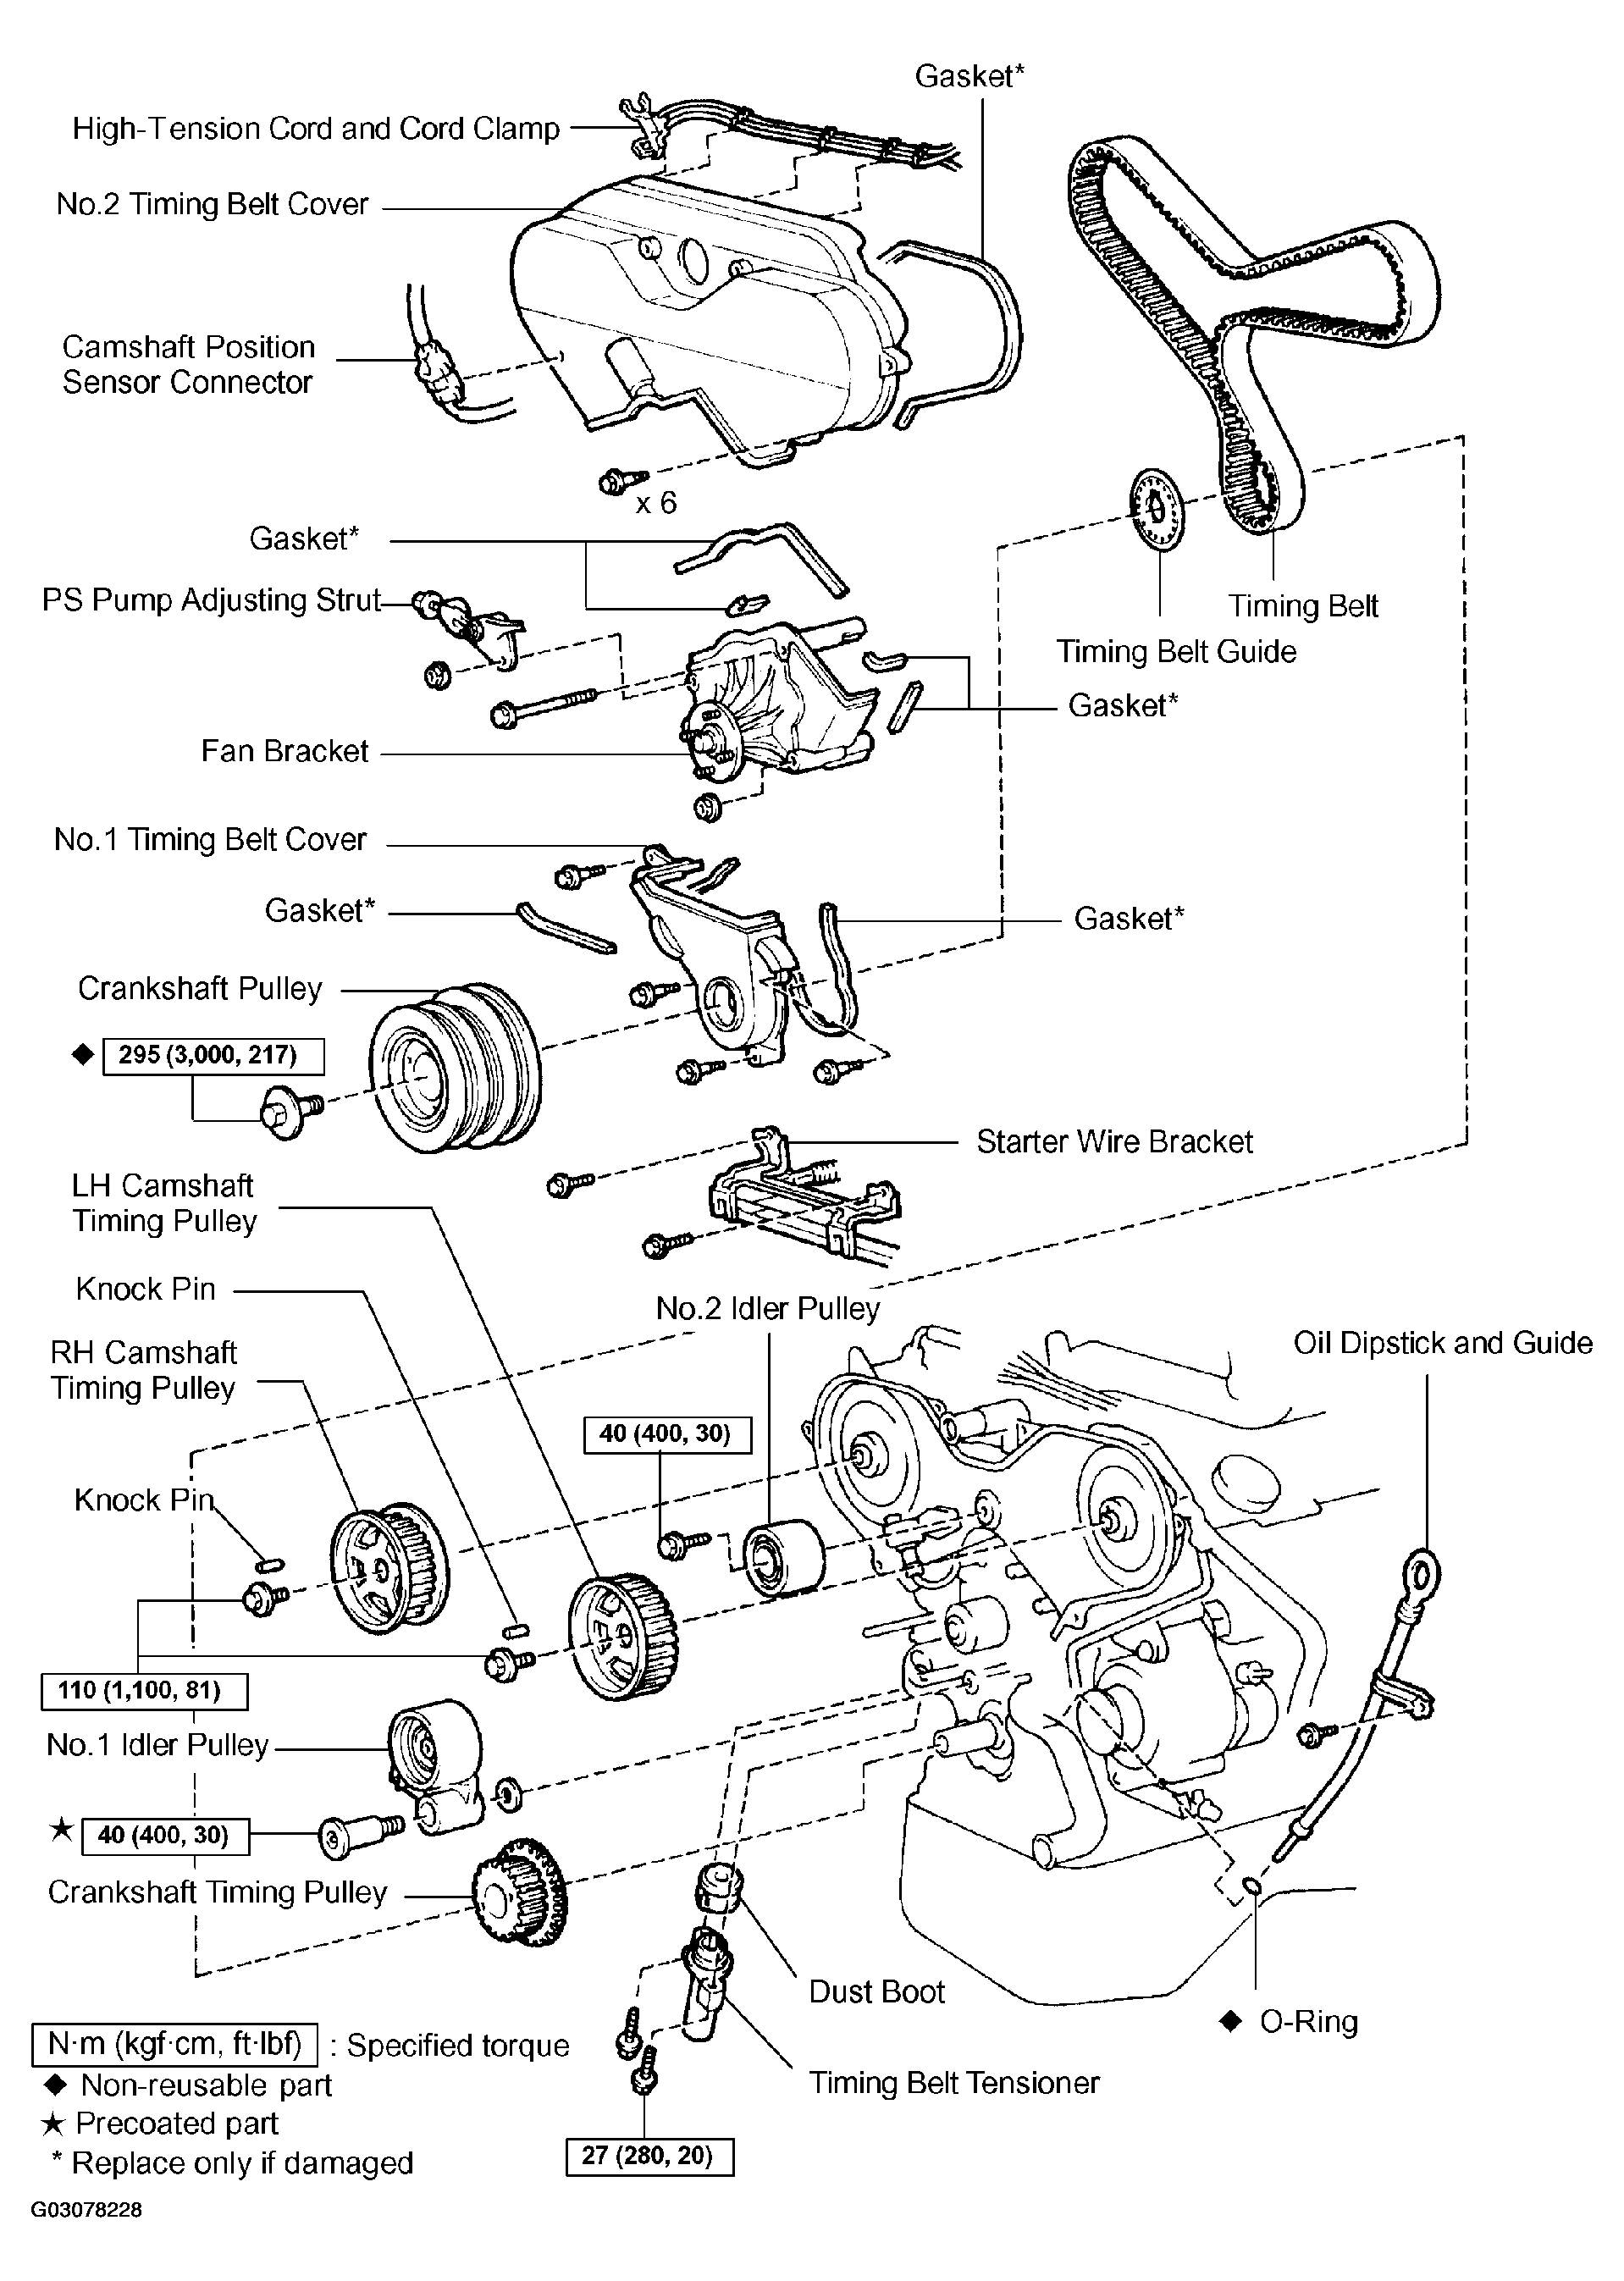 2004 Toyota Tacoma Serpentine Belt Routing And Timing Belt Diagrams